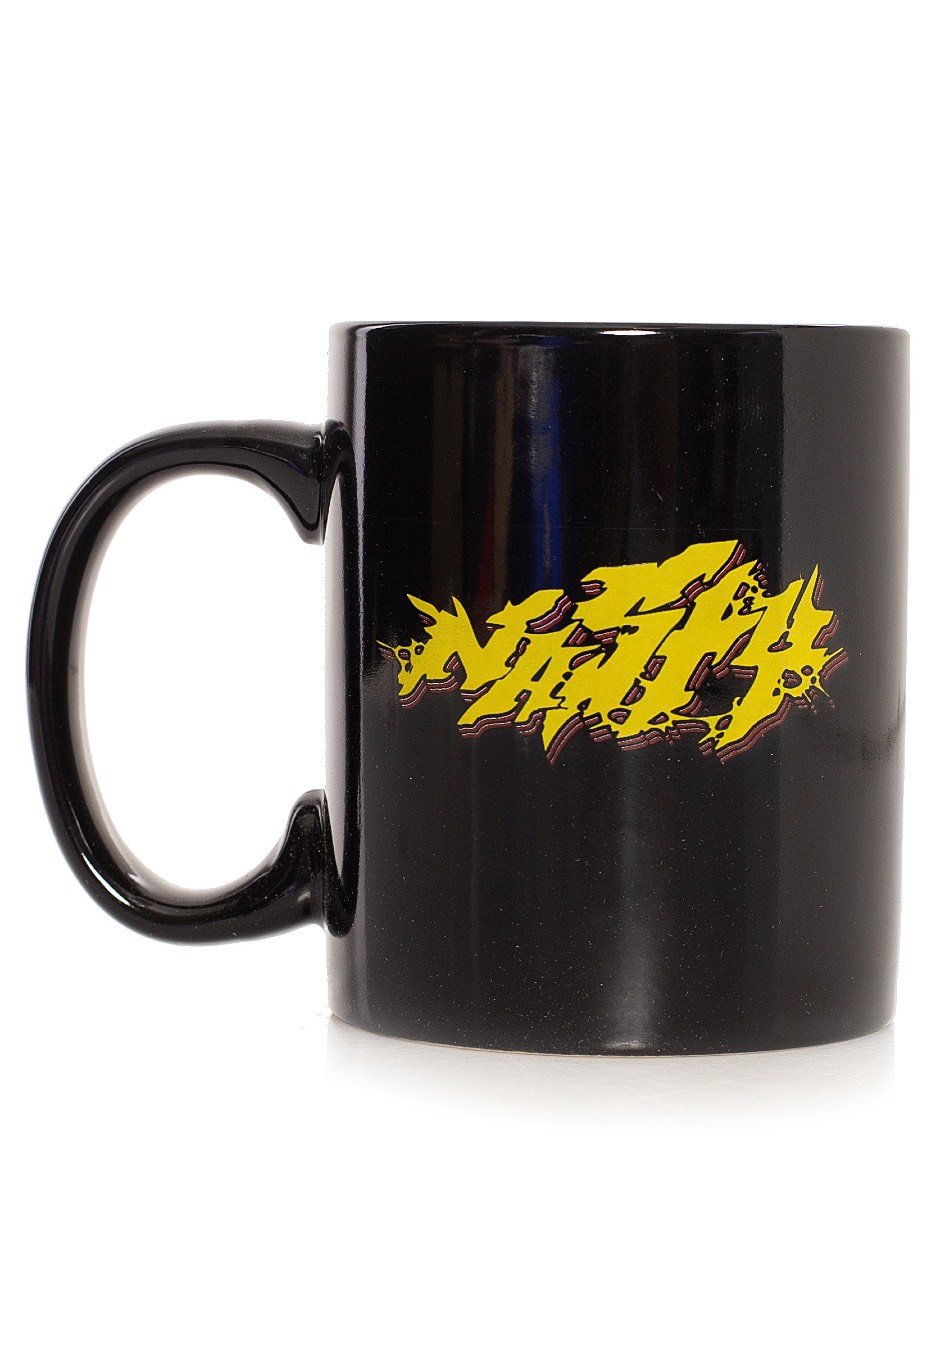 Nasty - Get Coffee For Each Other - Mug